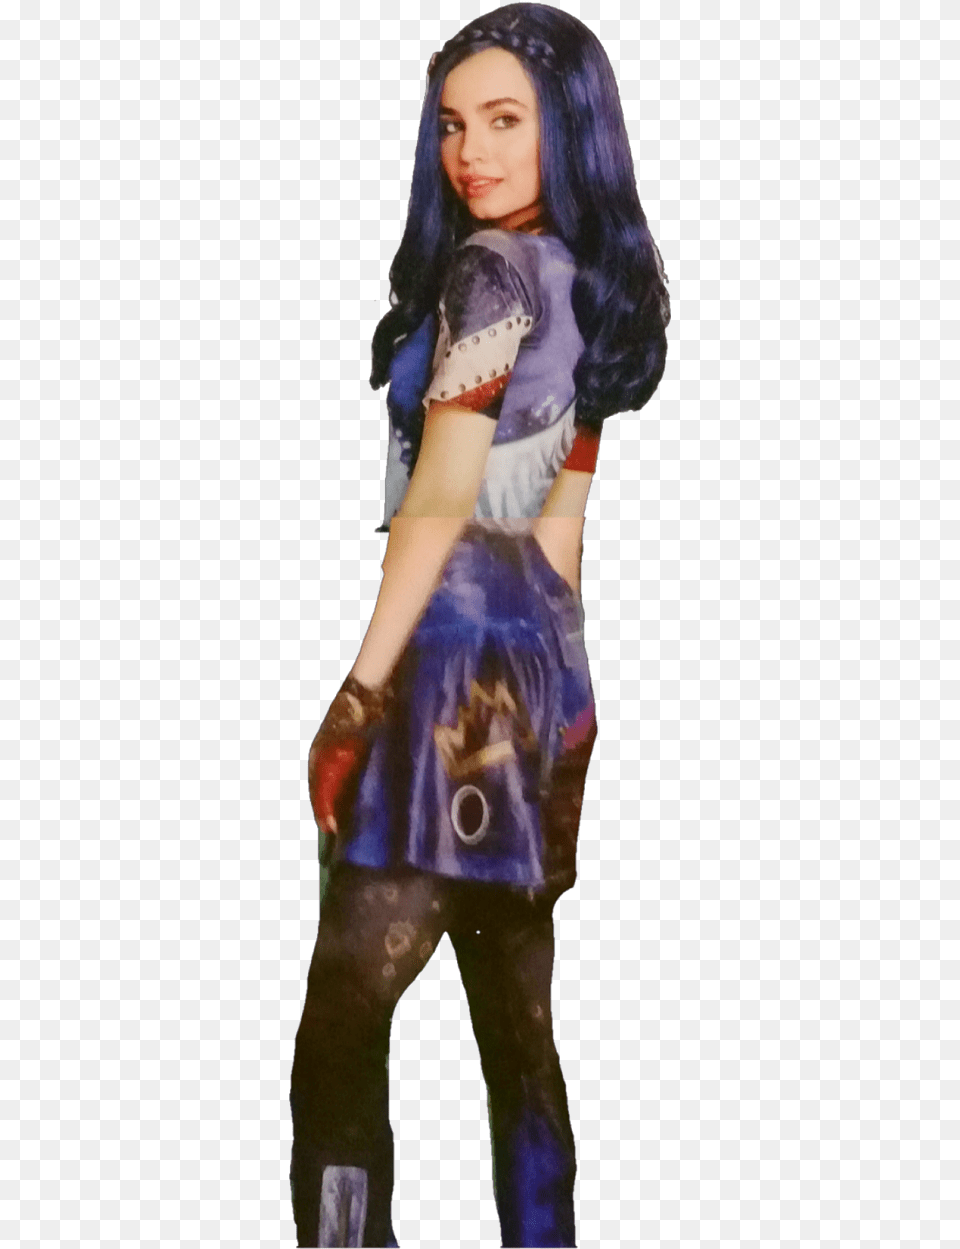 Evie Descendants Descendentes Descendants2 Descendentes2 Sofia Carson Evie Descendants, Teen, Person, Girl, Female Png Image